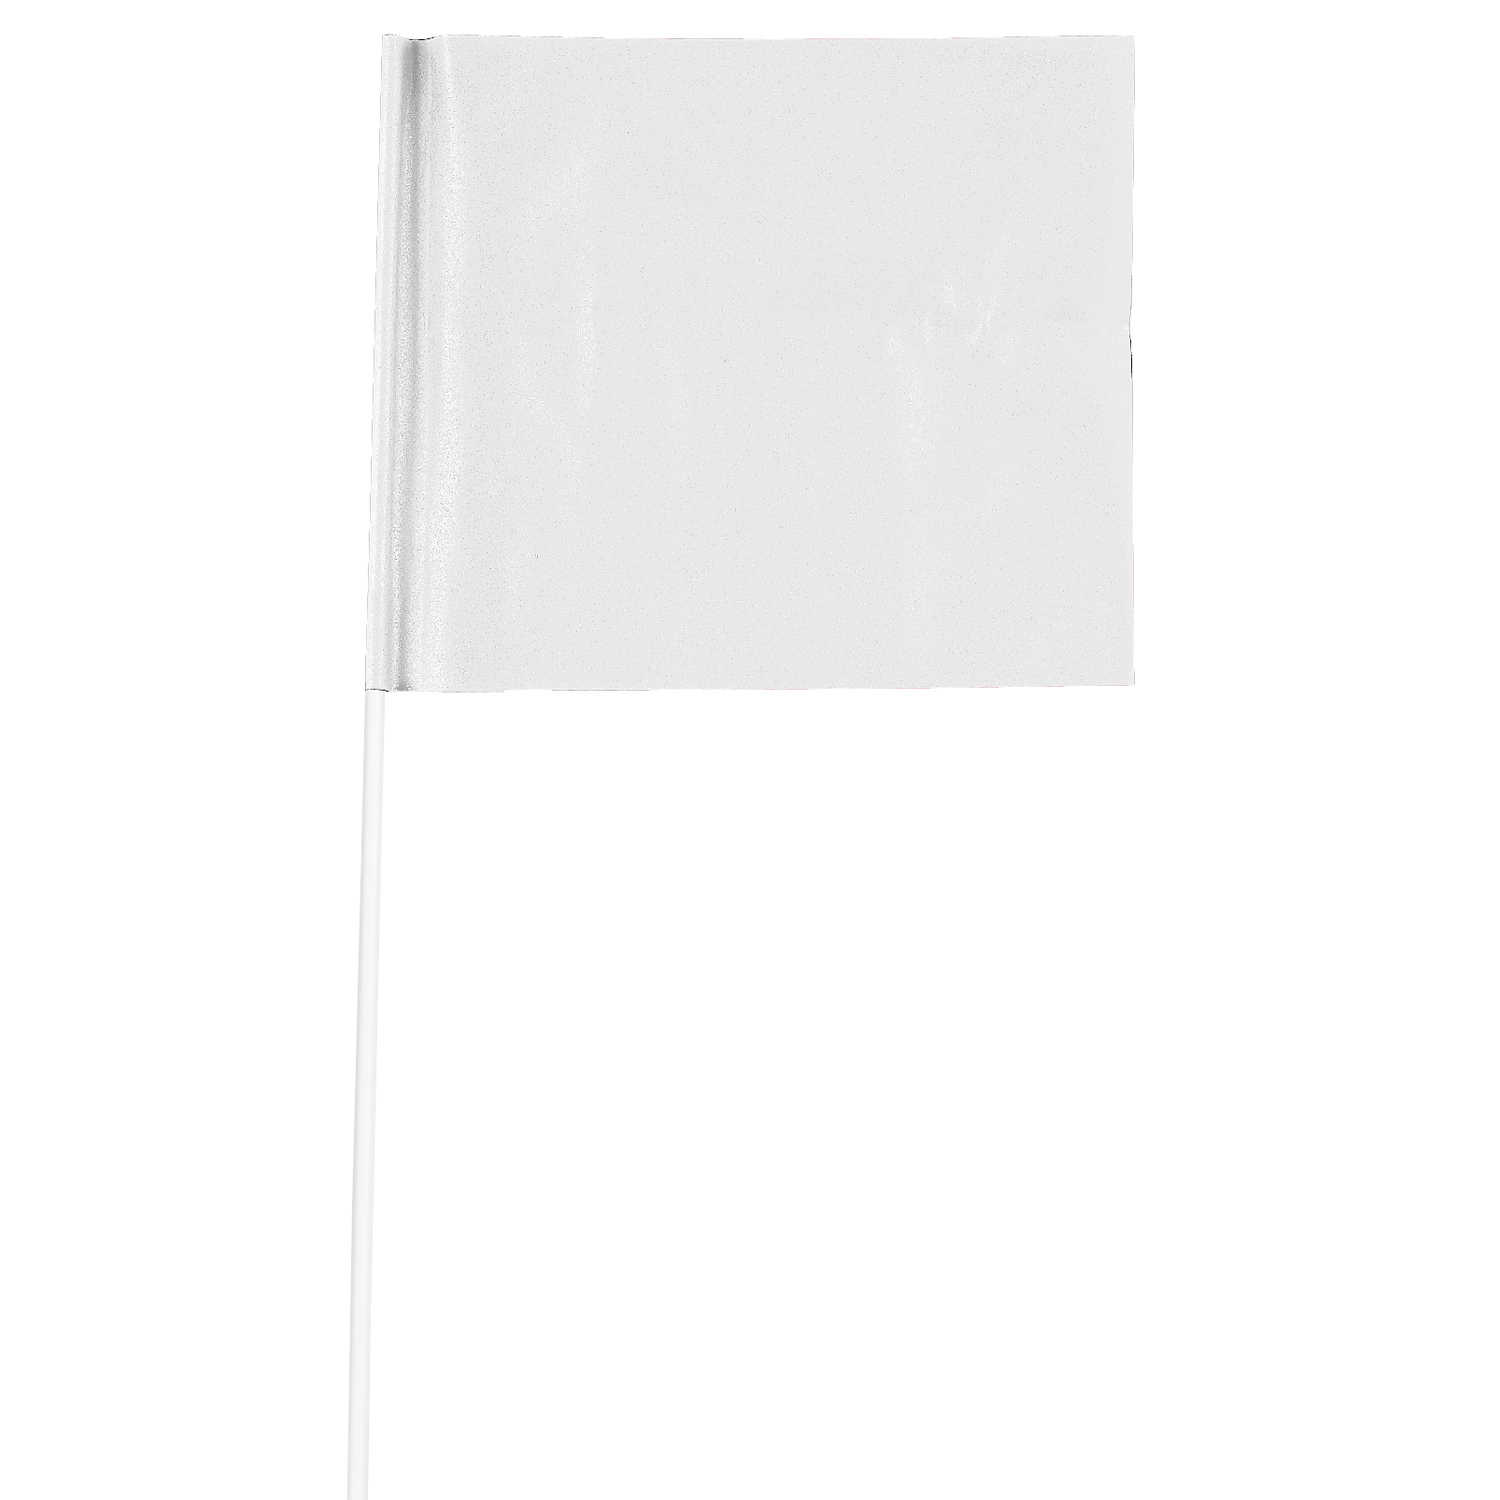 Swanson FW15100 2-Inch by 3-Inch Marking Flags with 15-Inch Wire Staffs White 100-Pack 